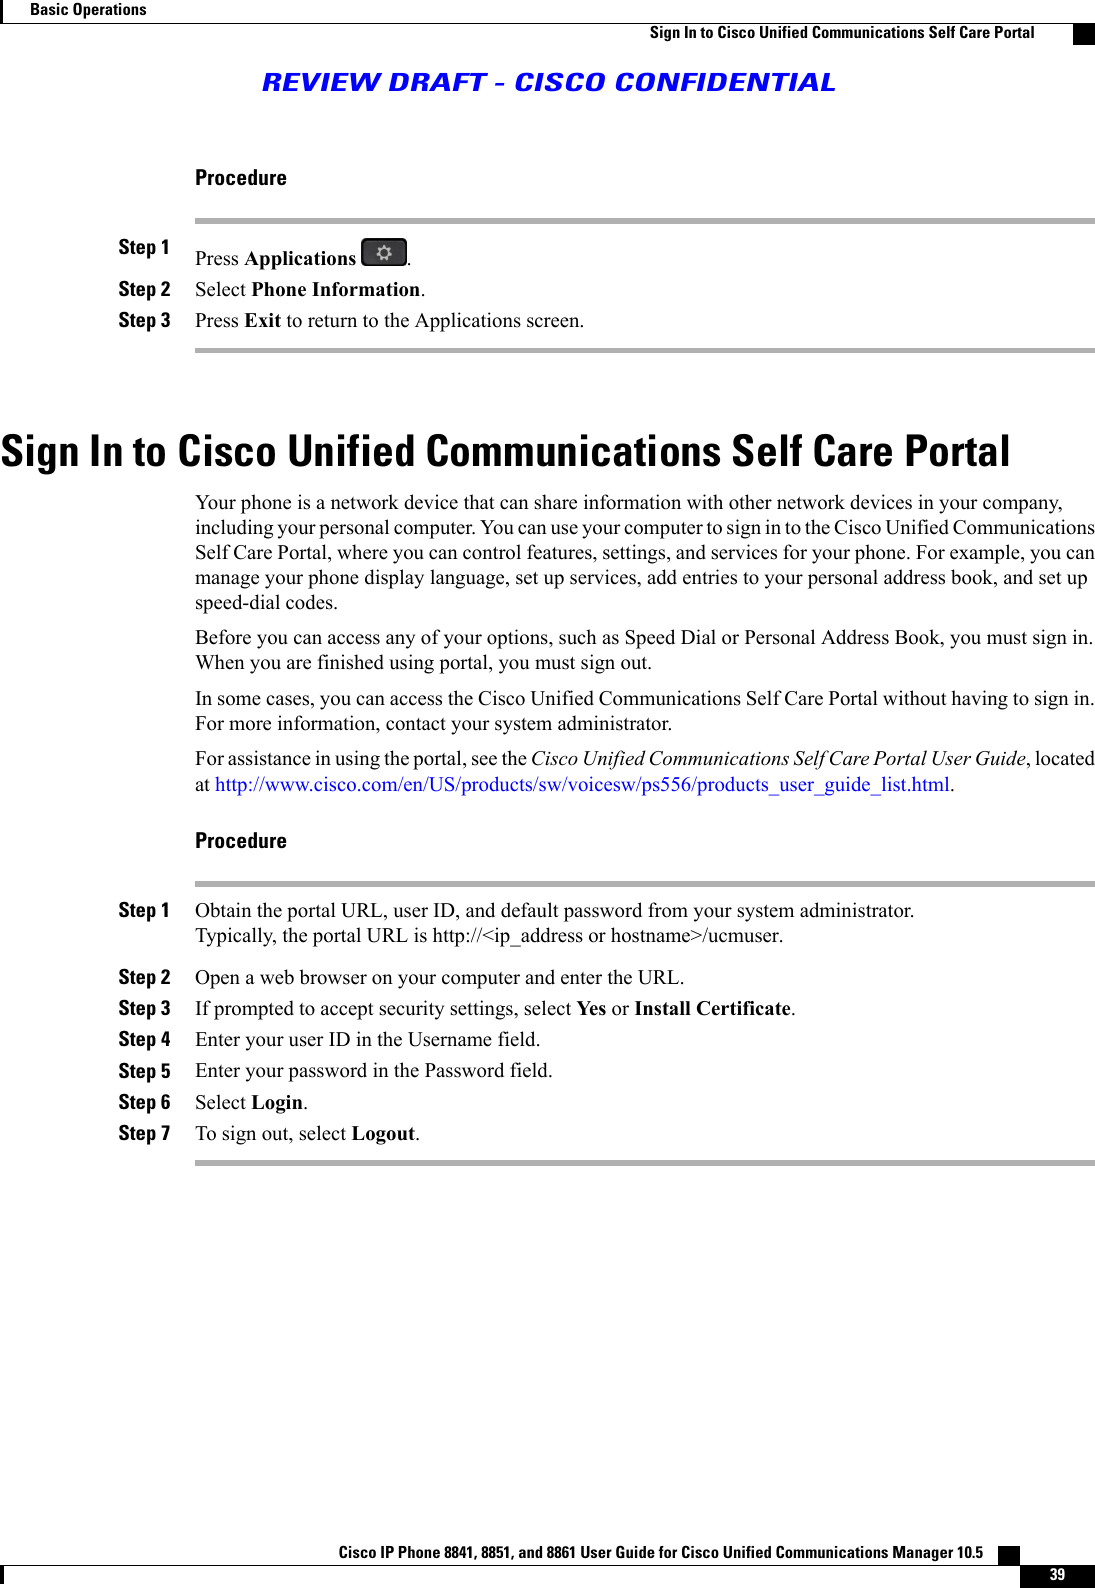 ProcedureStep 1 Press Applications .Step 2 Select Phone Information.Step 3 Press Exit to return to the Applications screen.Sign In to Cisco Unified Communications Self Care PortalYour phone is a network device that can share information with other network devices in your company,including your personal computer. You can use your computer to sign in to the Cisco Unified CommunicationsSelf Care Portal, where you can control features, settings, and services for your phone. For example, you canmanage your phone display language, set up services, add entries to your personal address book, and set upspeed-dial codes.Before you can access any of your options, such as Speed Dial or Personal Address Book, you must sign in.When you are finished using portal, you must sign out.In some cases, you can access the Cisco Unified Communications Self Care Portal without having to sign in.For more information, contact your system administrator.For assistance in using the portal, see the Cisco Unified Communications Self Care Portal User Guide, locatedat http://www.cisco.com/en/US/products/sw/voicesw/ps556/products_user_guide_list.html.ProcedureStep 1 Obtain the portal URL, user ID, and default password from your system administrator.Typically, the portal URL is http://&lt;ip_address or hostname&gt;/ucmuser.Step 2 Open a web browser on your computer and enter the URL.Step 3 If prompted to accept security settings, select Yes or Install Certificate.Step 4 Enter your user ID in the Username field.Step 5 Enter your password in the Password field.Step 6 Select Login.Step 7 To sign out, select Logout.Cisco IP Phone 8841, 8851, and 8861 User Guide for Cisco Unified Communications Manager 10.5    39Basic OperationsSign In to Cisco Unified Communications Self Care PortalREVIEW DRAFT - CISCO CONFIDENTIAL